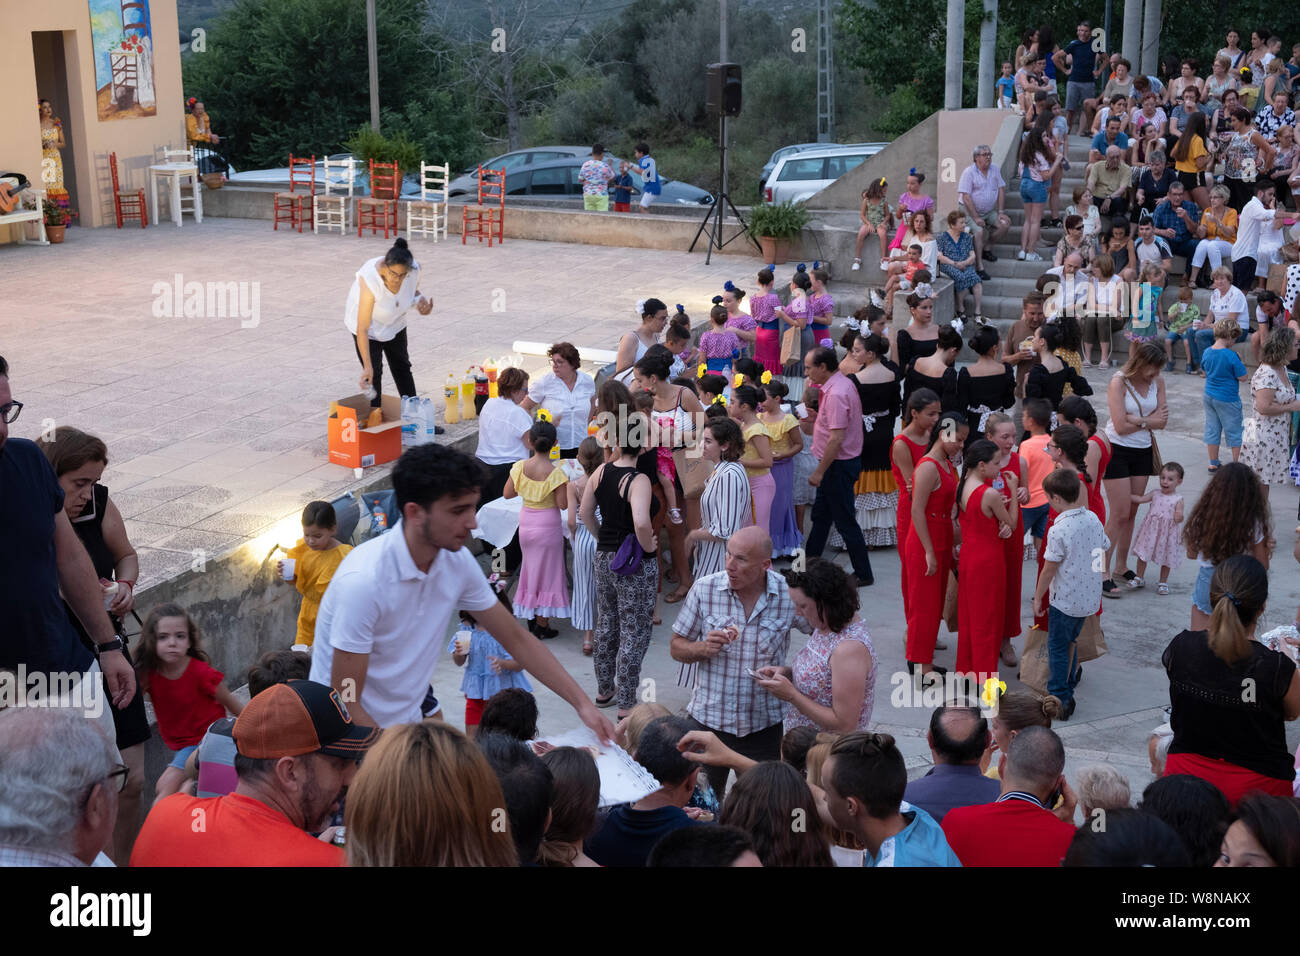 Audience during an interval at a preformance in an open air theatre Stock Photo